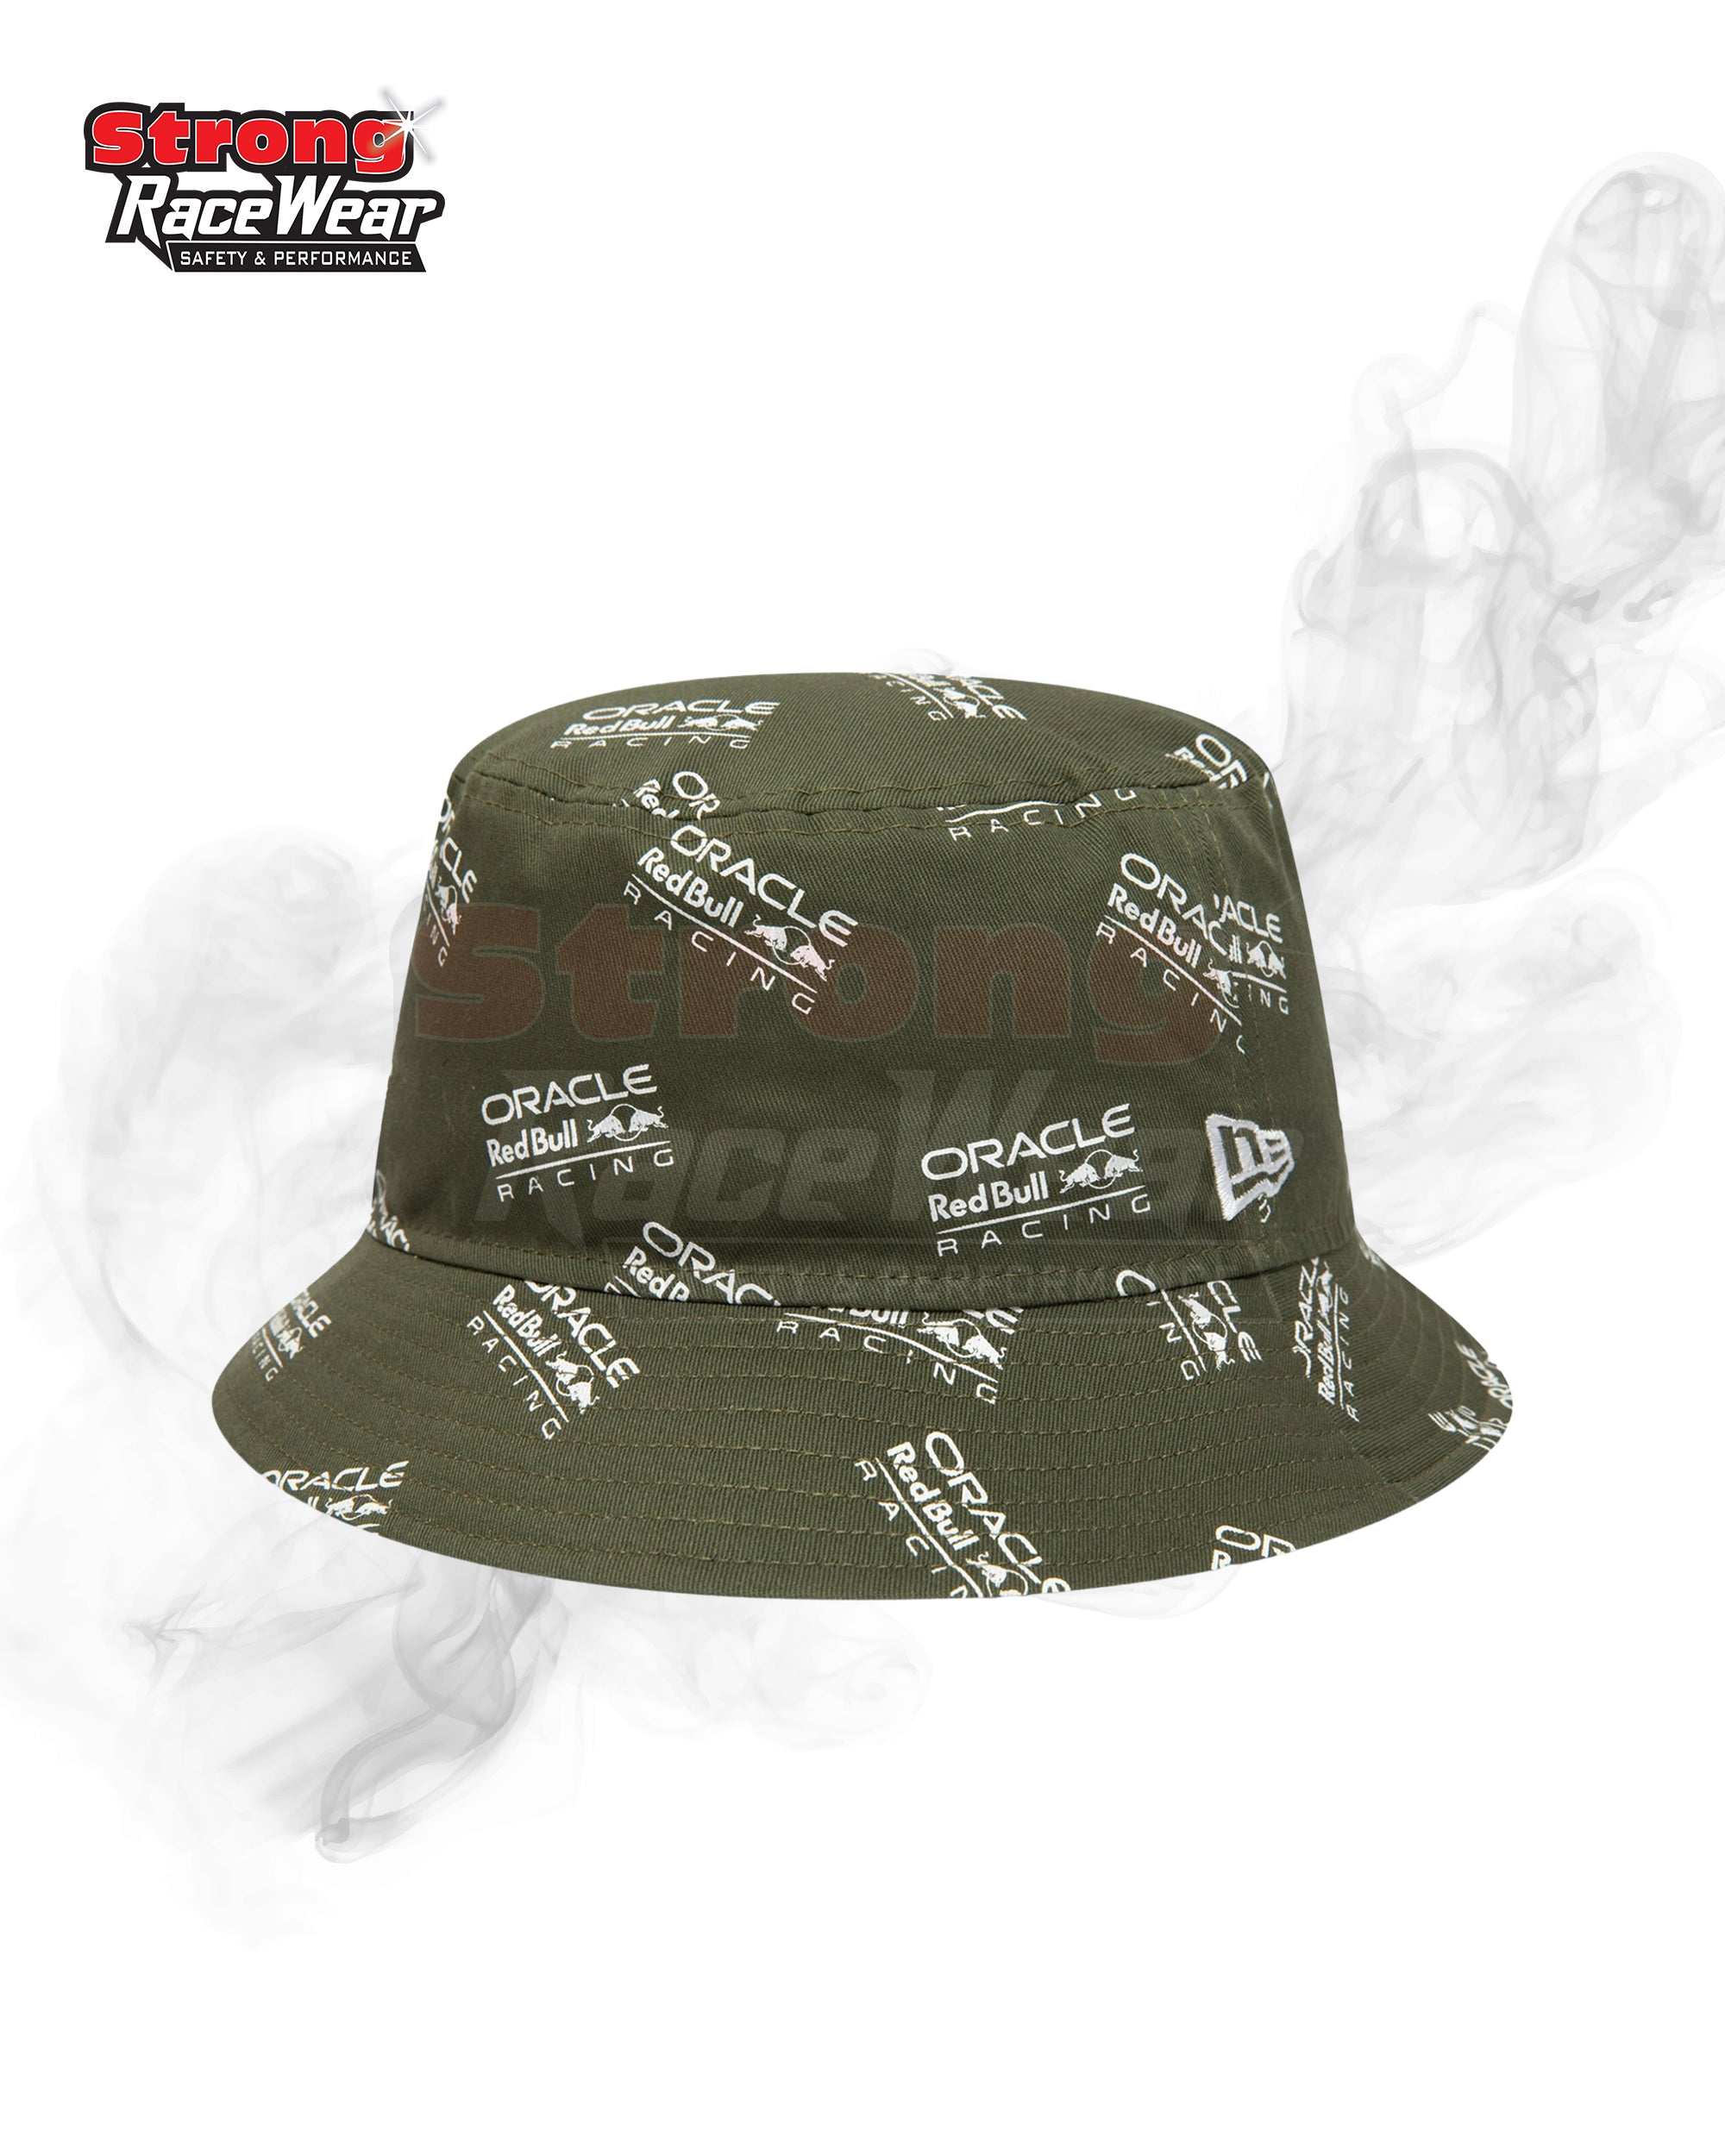 Red Bull Racing Lifestyle Bucket Hat